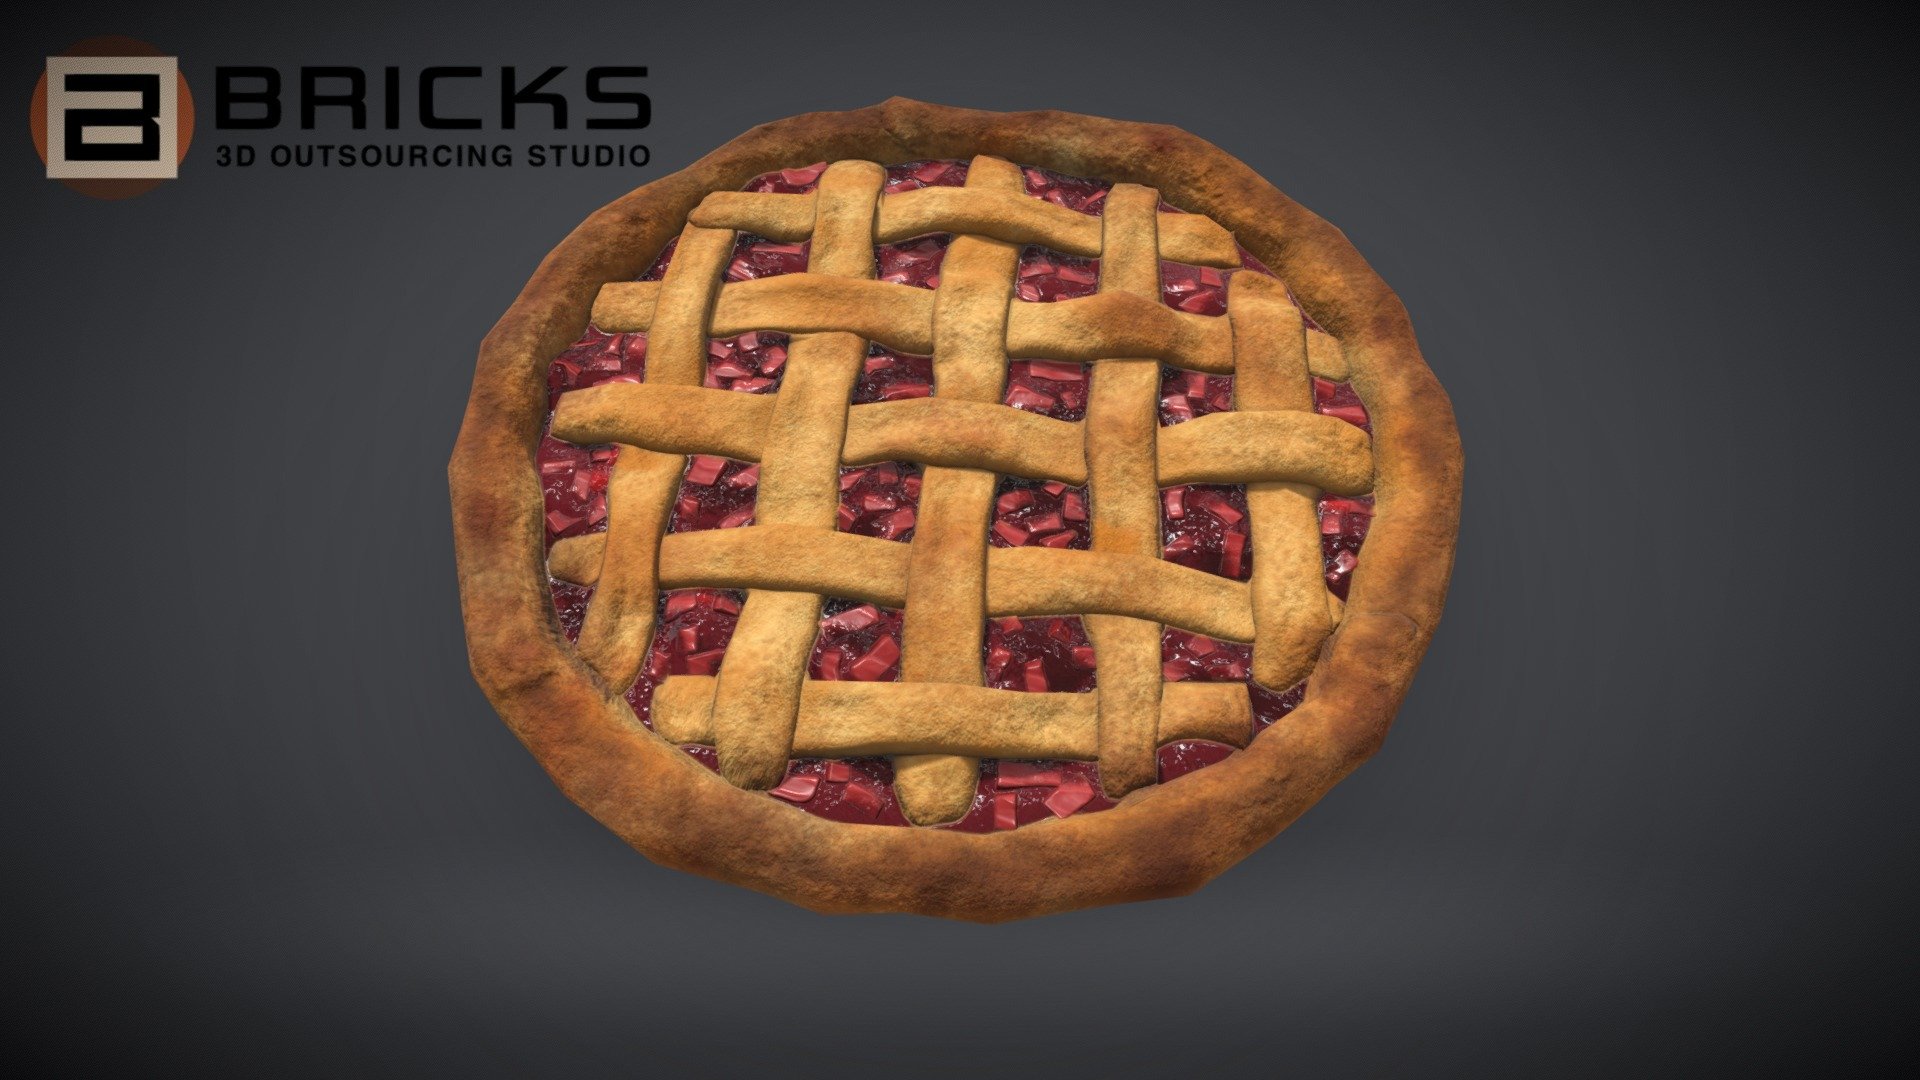 PBR Food Asset:
RhubarbPie
Polycount: 1564
Vertex count: 784
Texture Size: 2048px x 2048px
Normal: OpenGL

If you need any adjust in file please contact us: team@bricks3dstudio.com

Hire us: tringuyen@bricks3dstudio.com
Here is us: https://www.bricks3dstudio.com/
        https://www.artstation.com/bricksstudio
        https://www.facebook.com/Bricks3dstudio/
        https://www.linkedin.com/in/bricks-studio-b10462252/ - RhubarbPie - Buy Royalty Free 3D model by Bricks Studio (@bricks3dstudio) 3d model